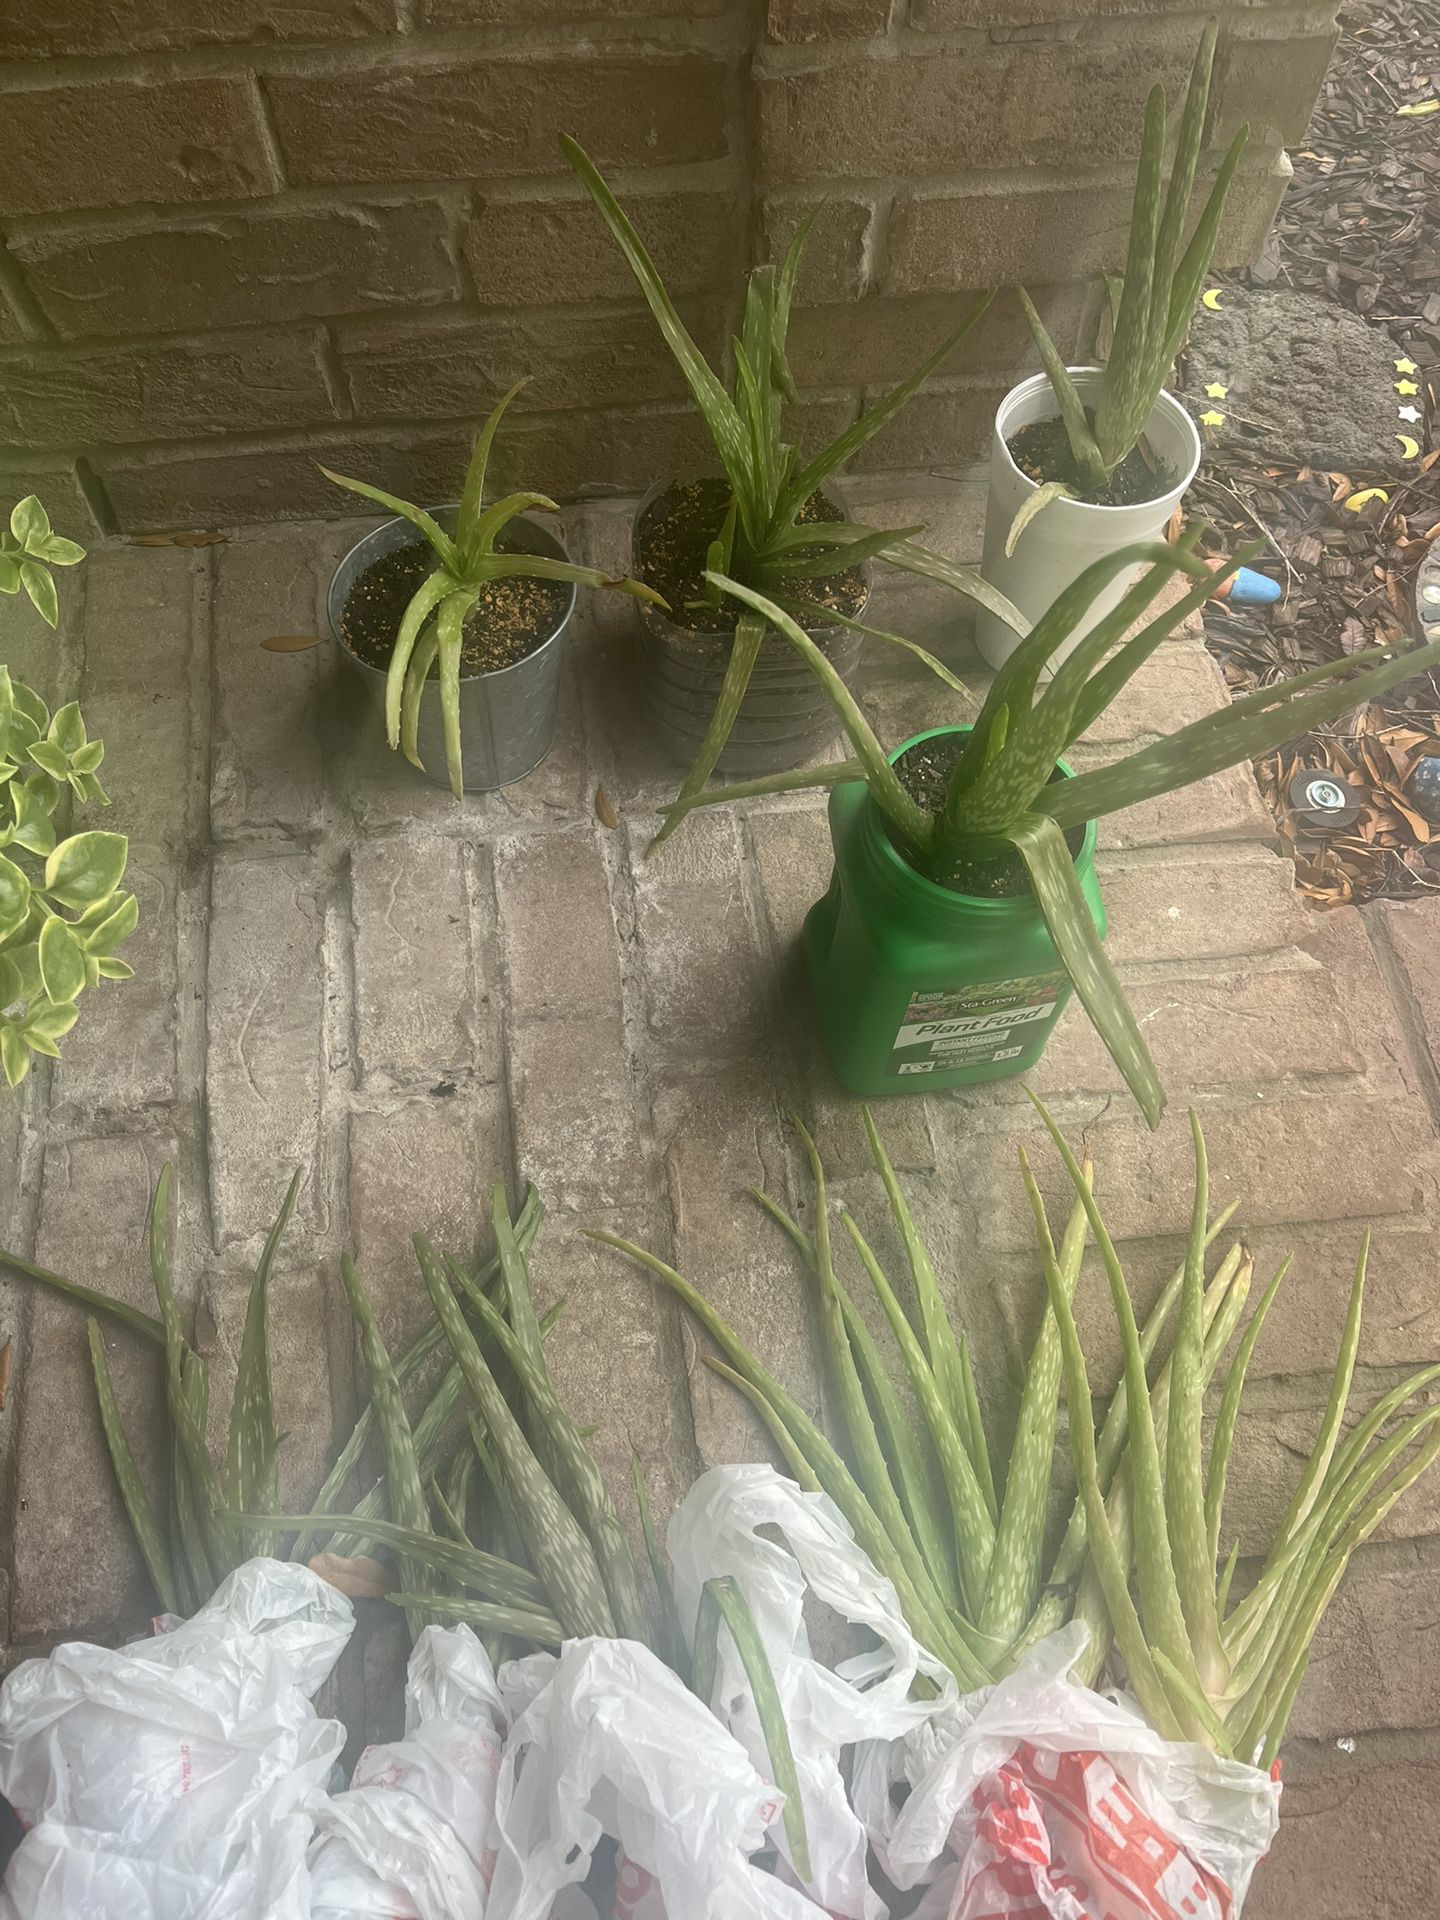 Lots of Aloe Vera Cactus - All for $20